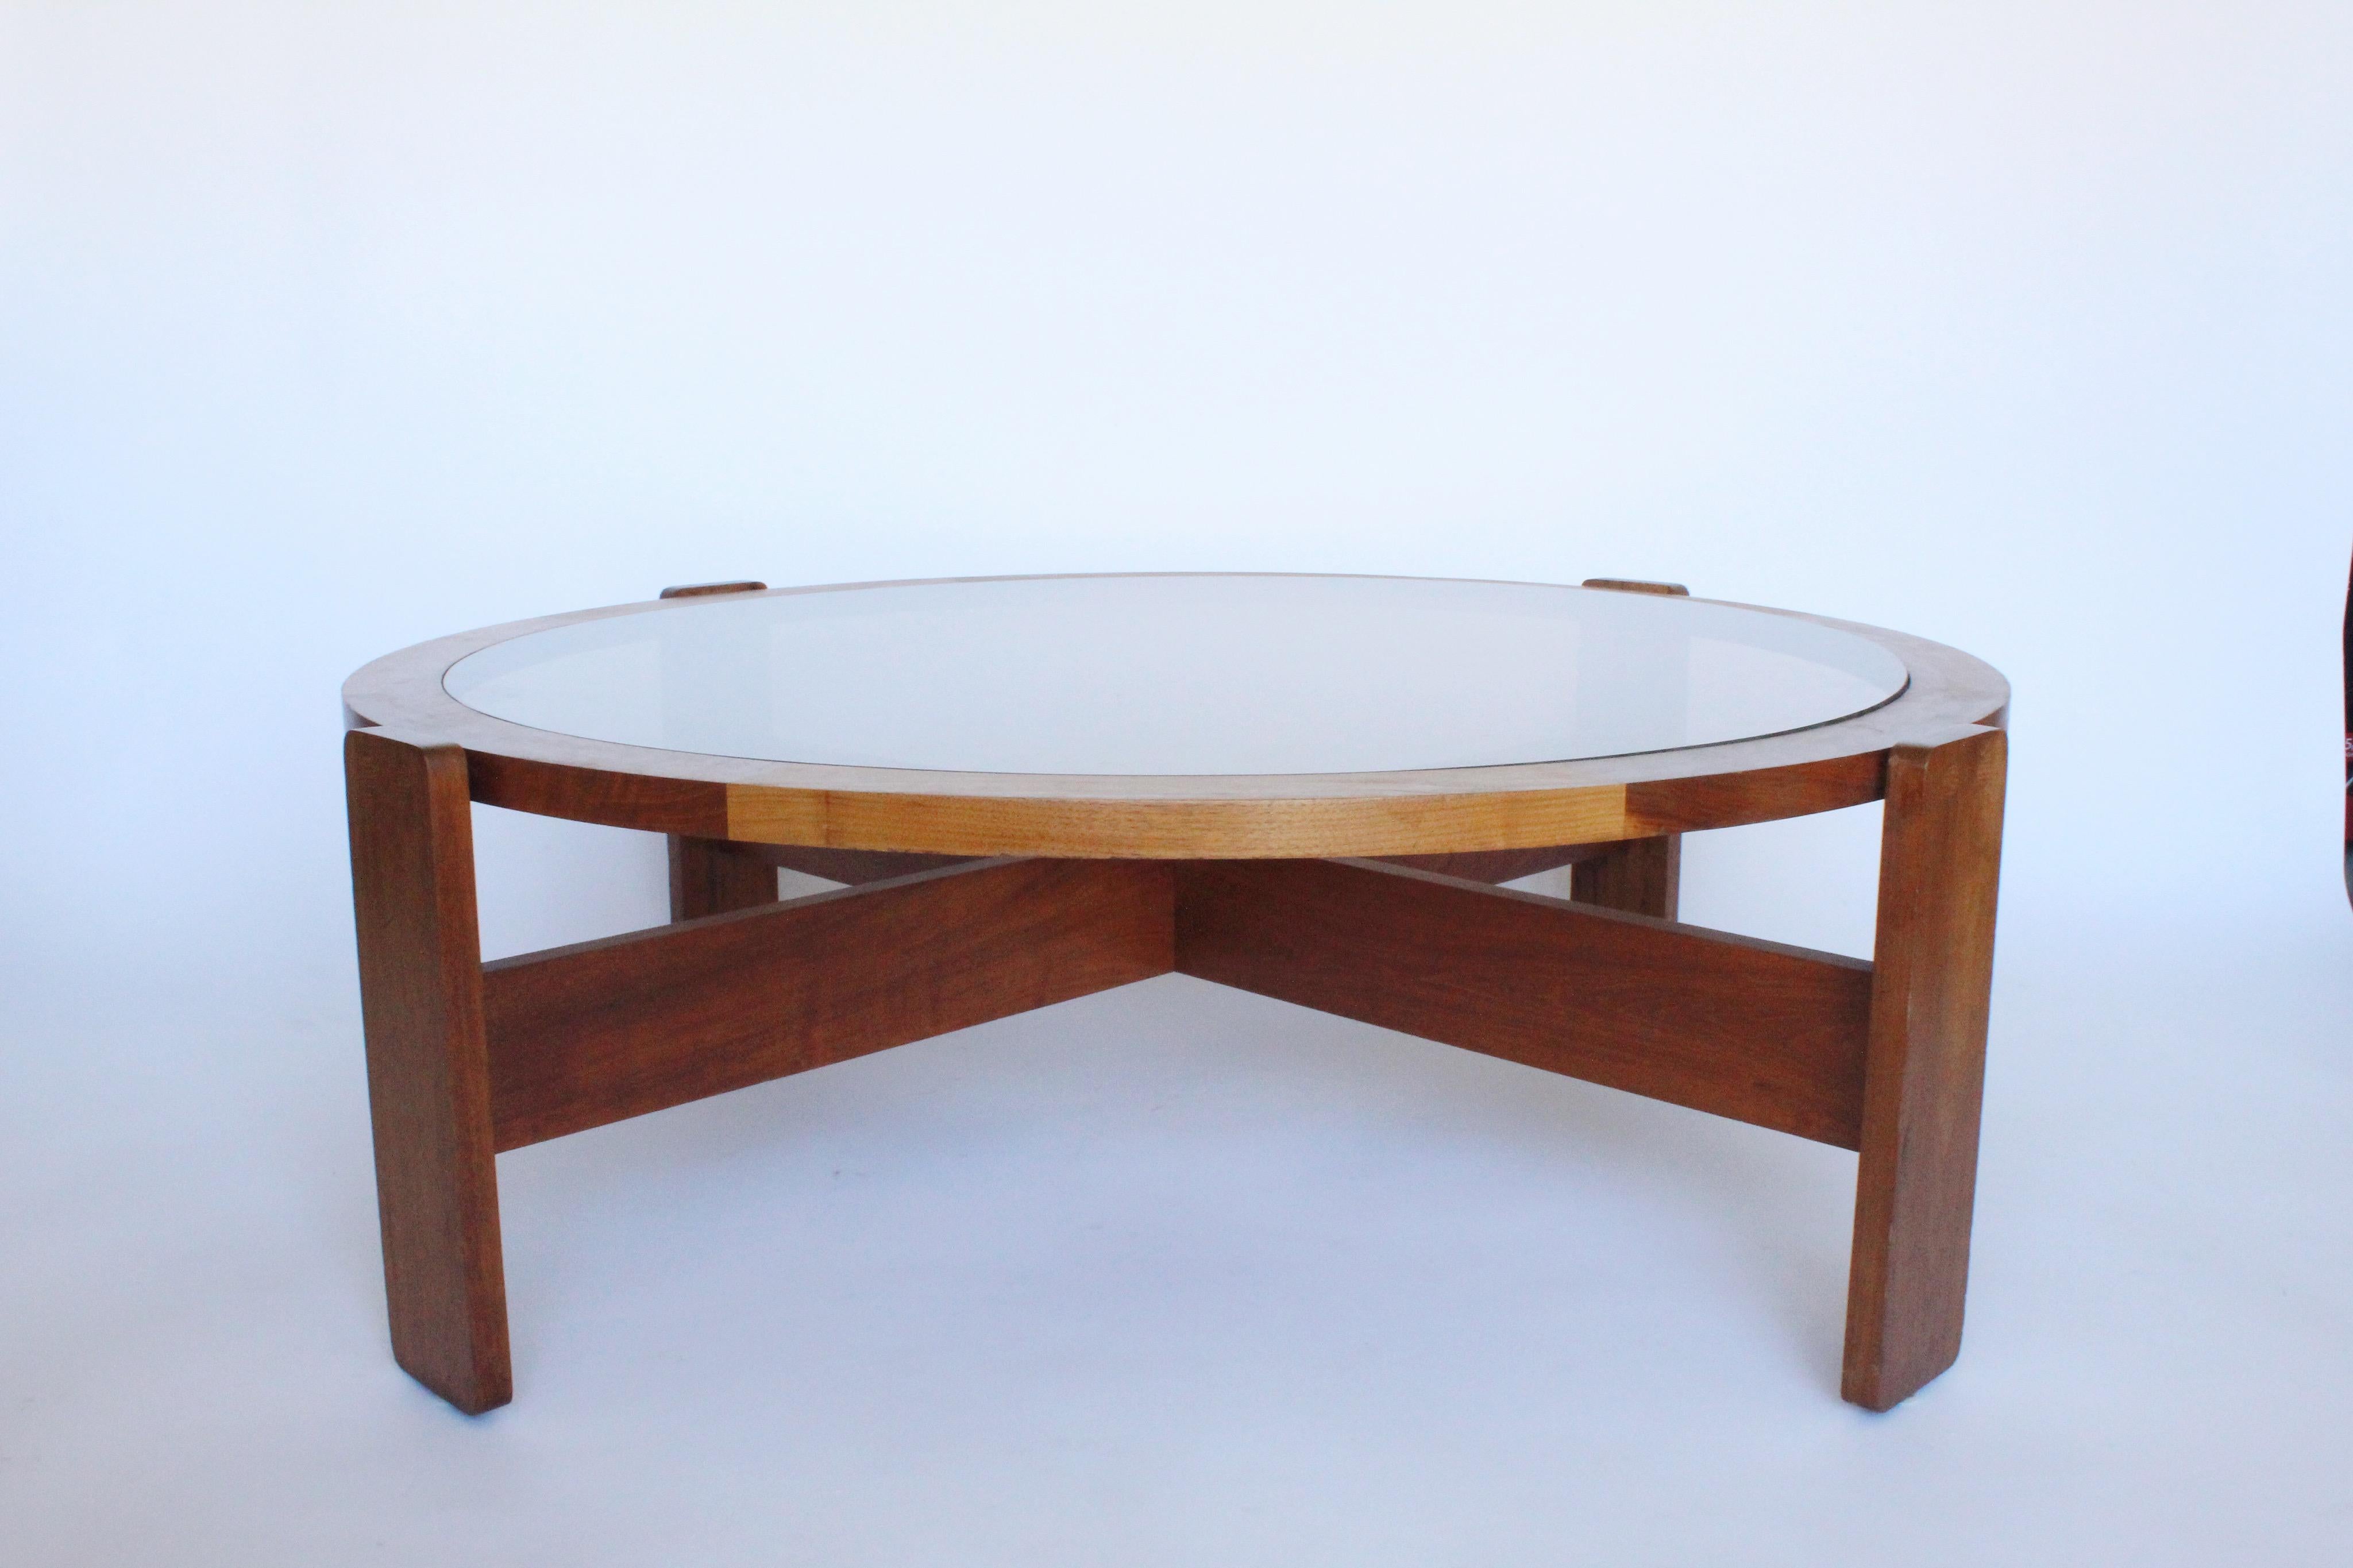 Walnut coffee table designed by Lou Hodges for California Design Group, circa 1970. Lou Hodges designs were mainly designed and handmade in oak and rarely made in walnut. This is a beautiful and hard to find example of Lou Hodges California Design.